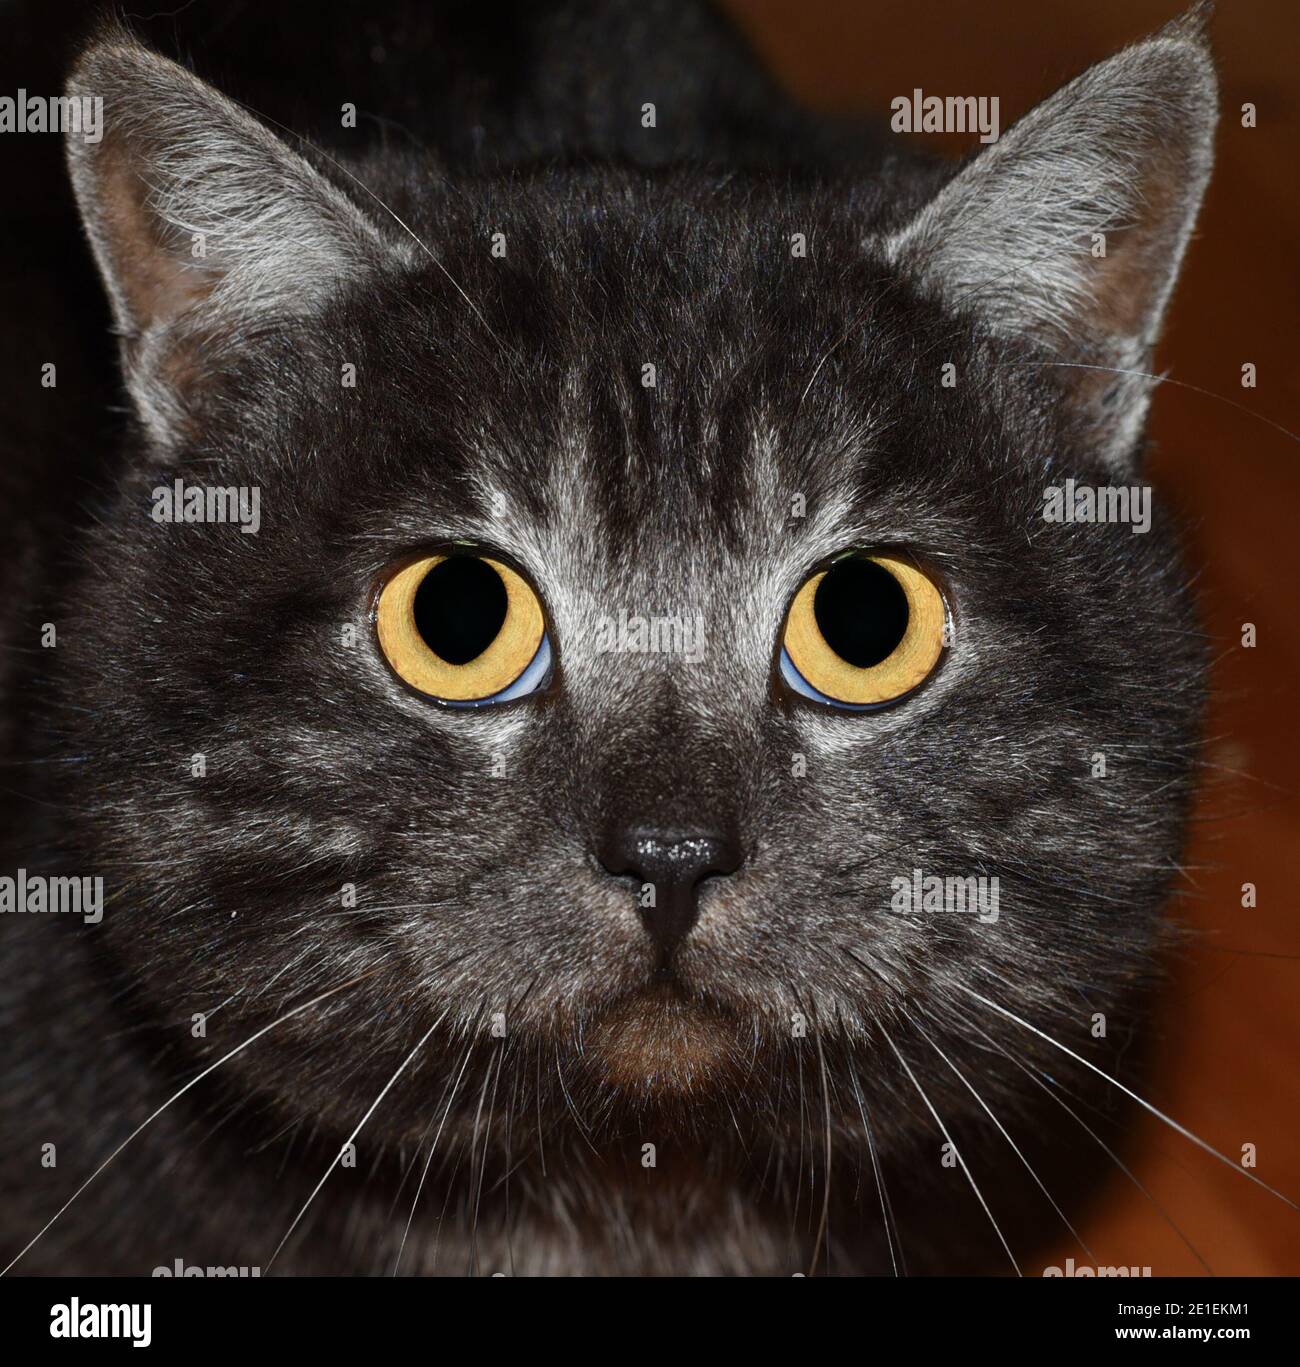 Big eyes of scared gray cat Stock Photo